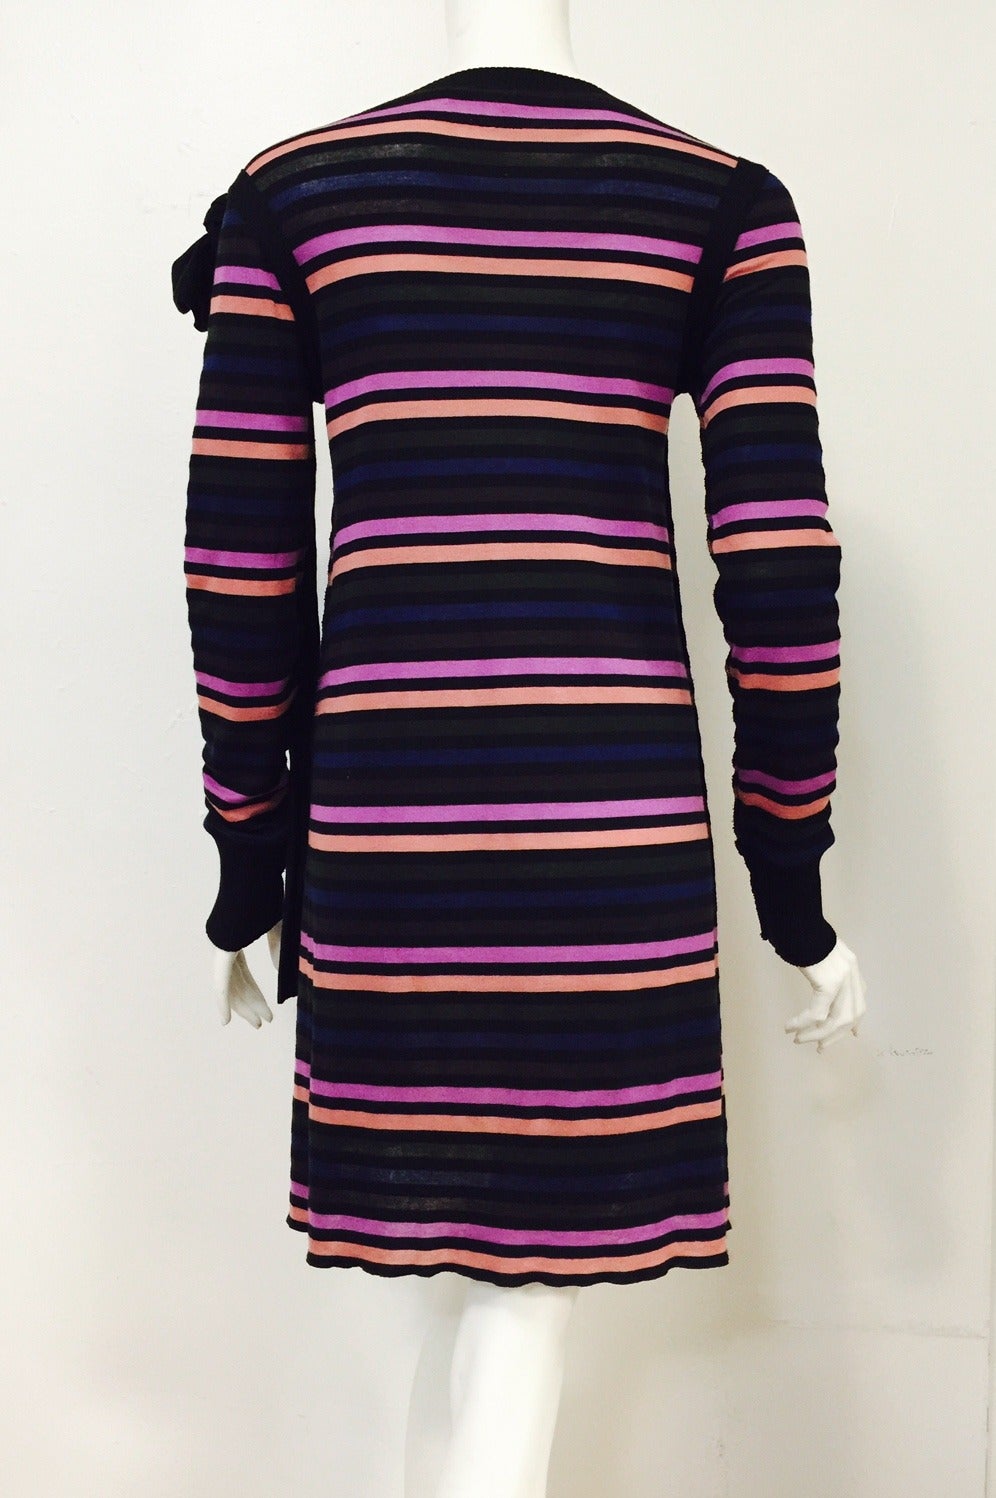 Rykiel Karma Body & Soul Long Sleeve Cotton Shift Dress In Excellent Condition For Sale In Palm Beach, FL